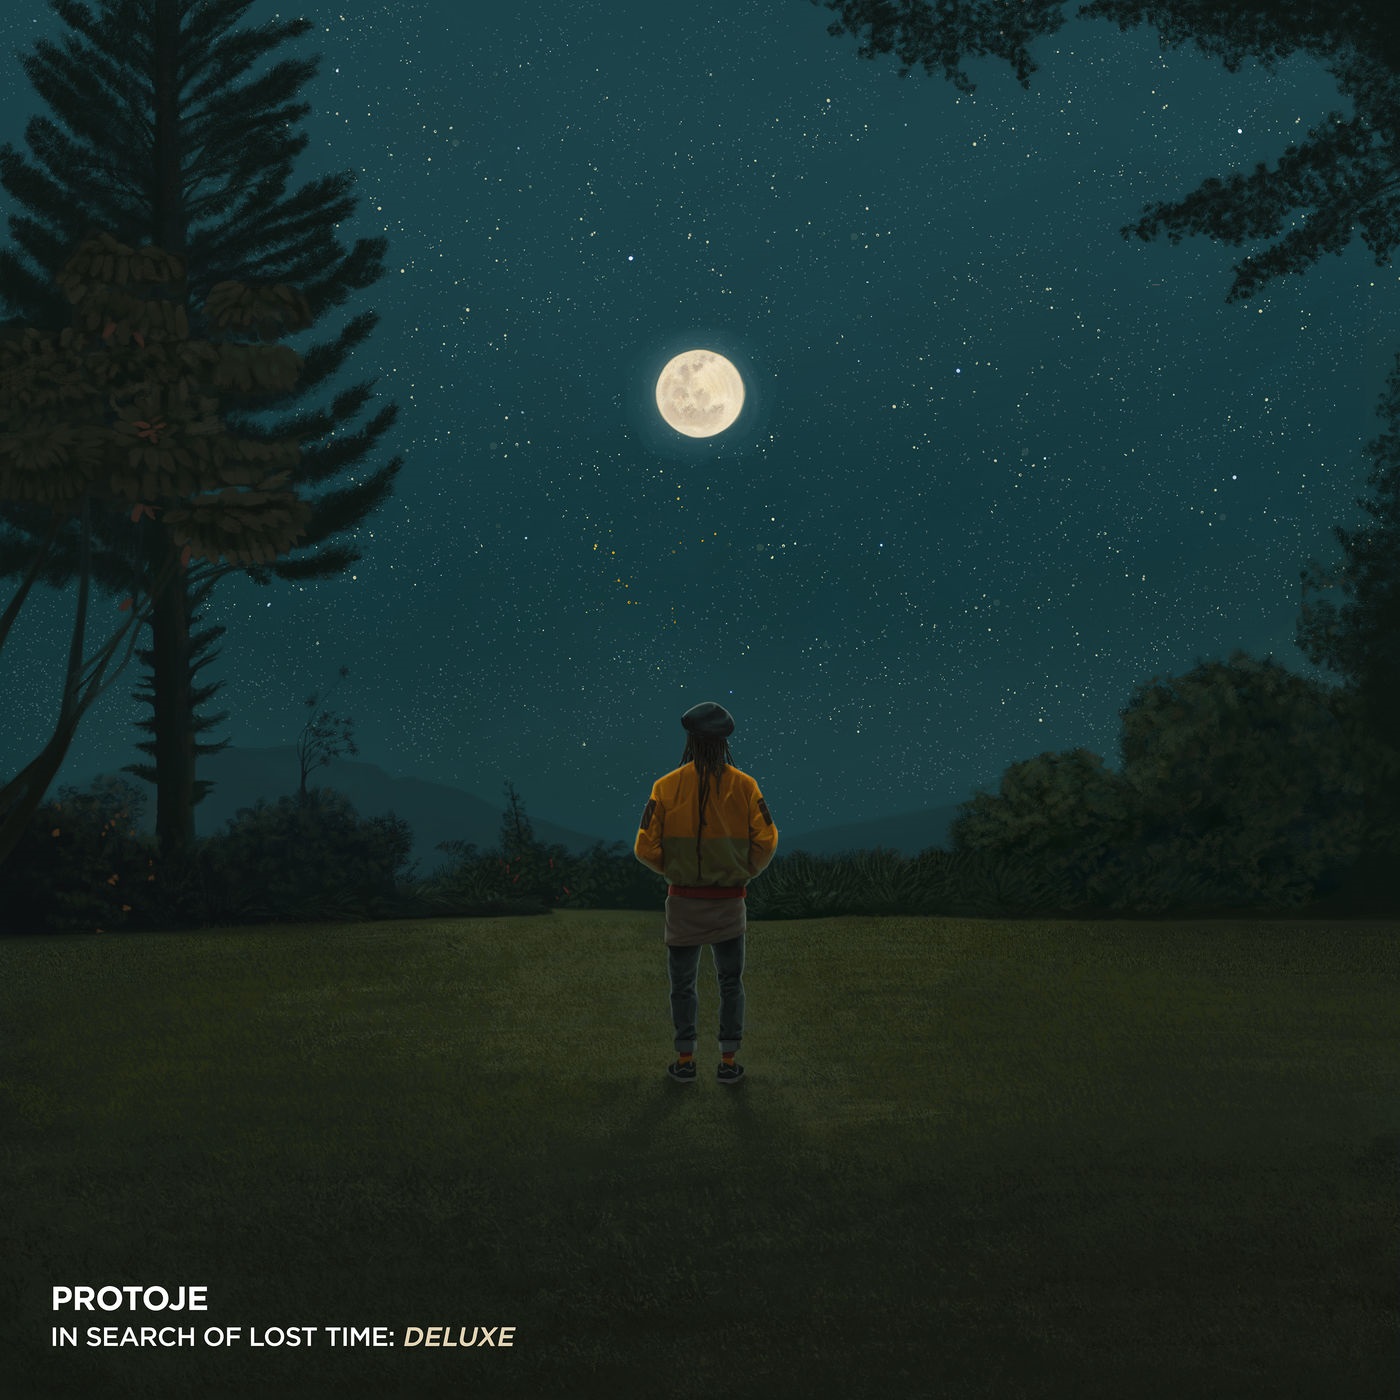 Protoje – In Search of Lost Time (Deluxe Edition) (2020/2021) [FLAC 24bit/48kHz]